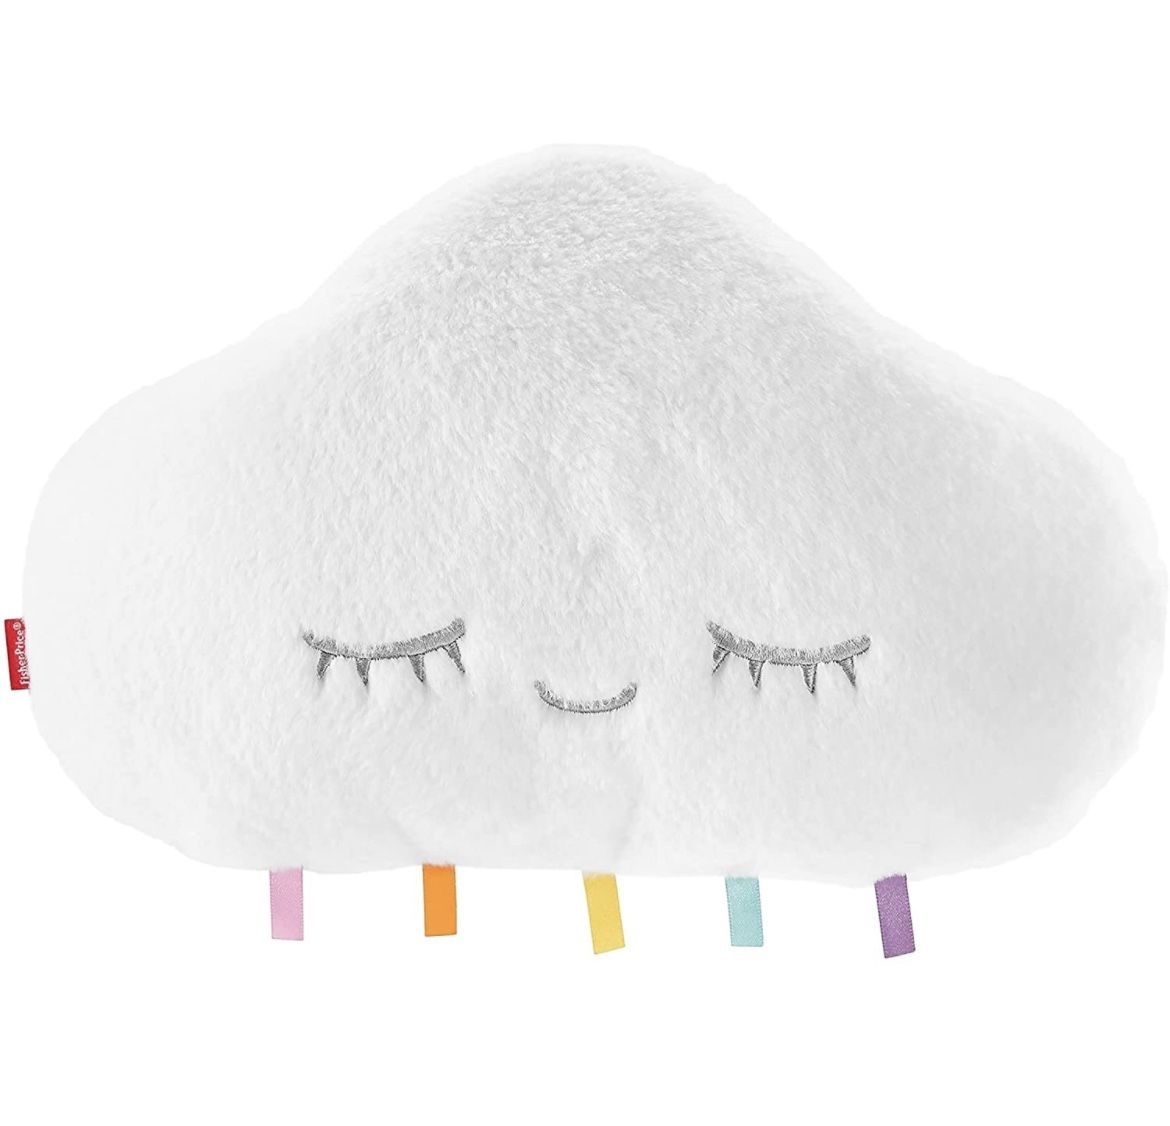 Fisher-Price Twinkle & Cuddle Cloud Soother, Plush Crib-Attach Baby Soother